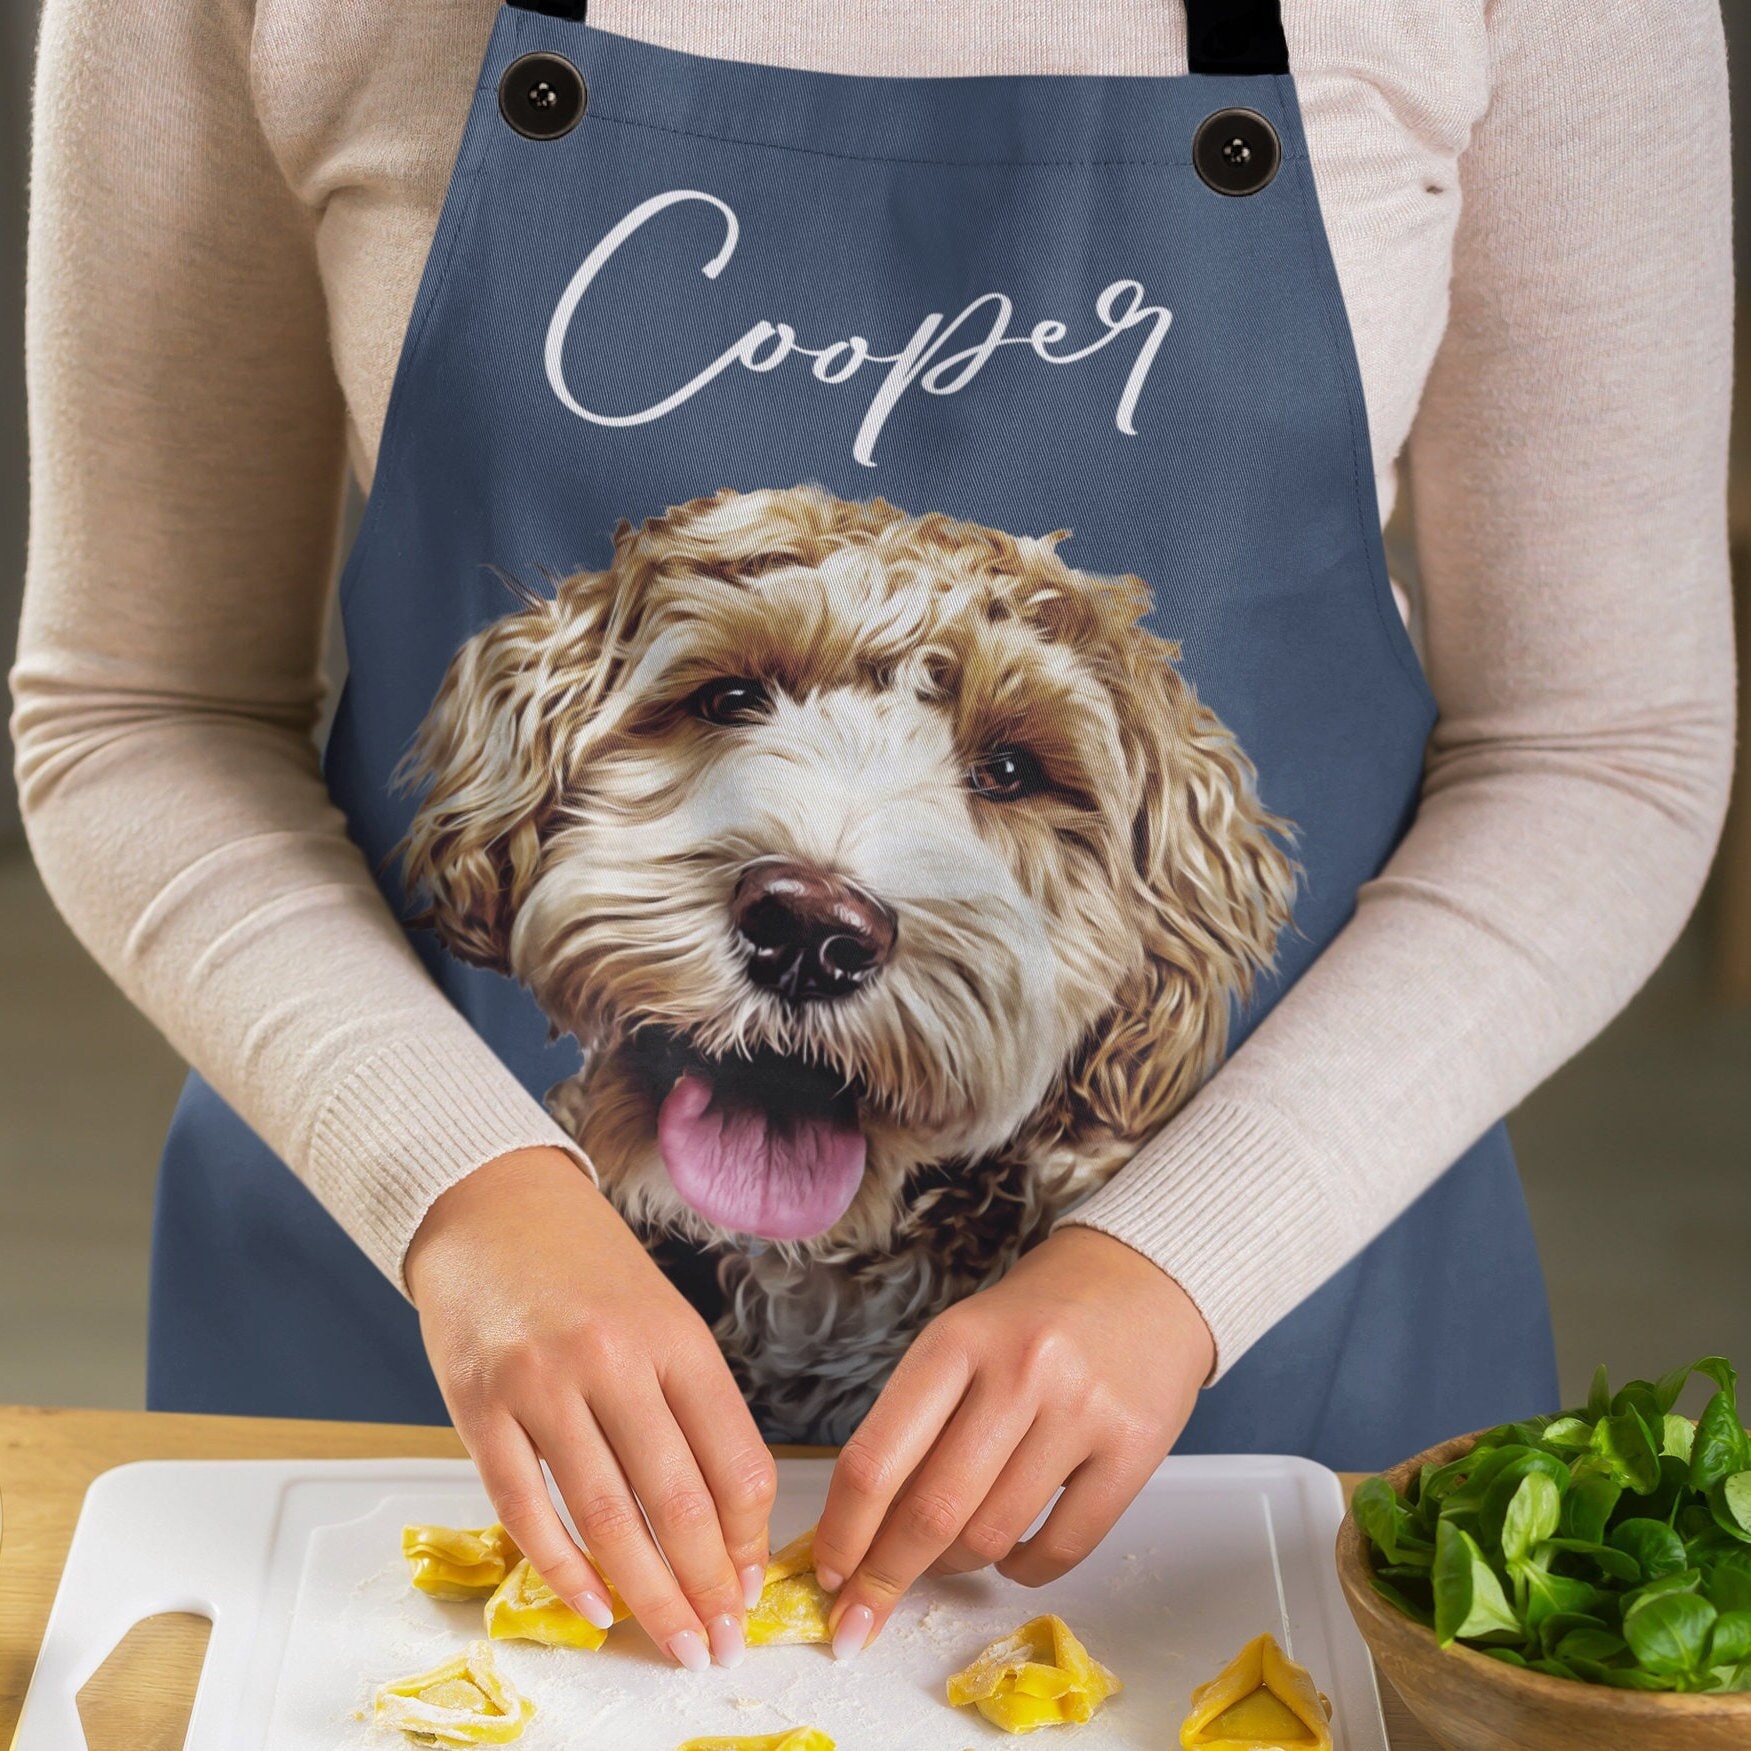 Apron With Print „Best Mom“ – Essential Cooking Tool For Every Chef